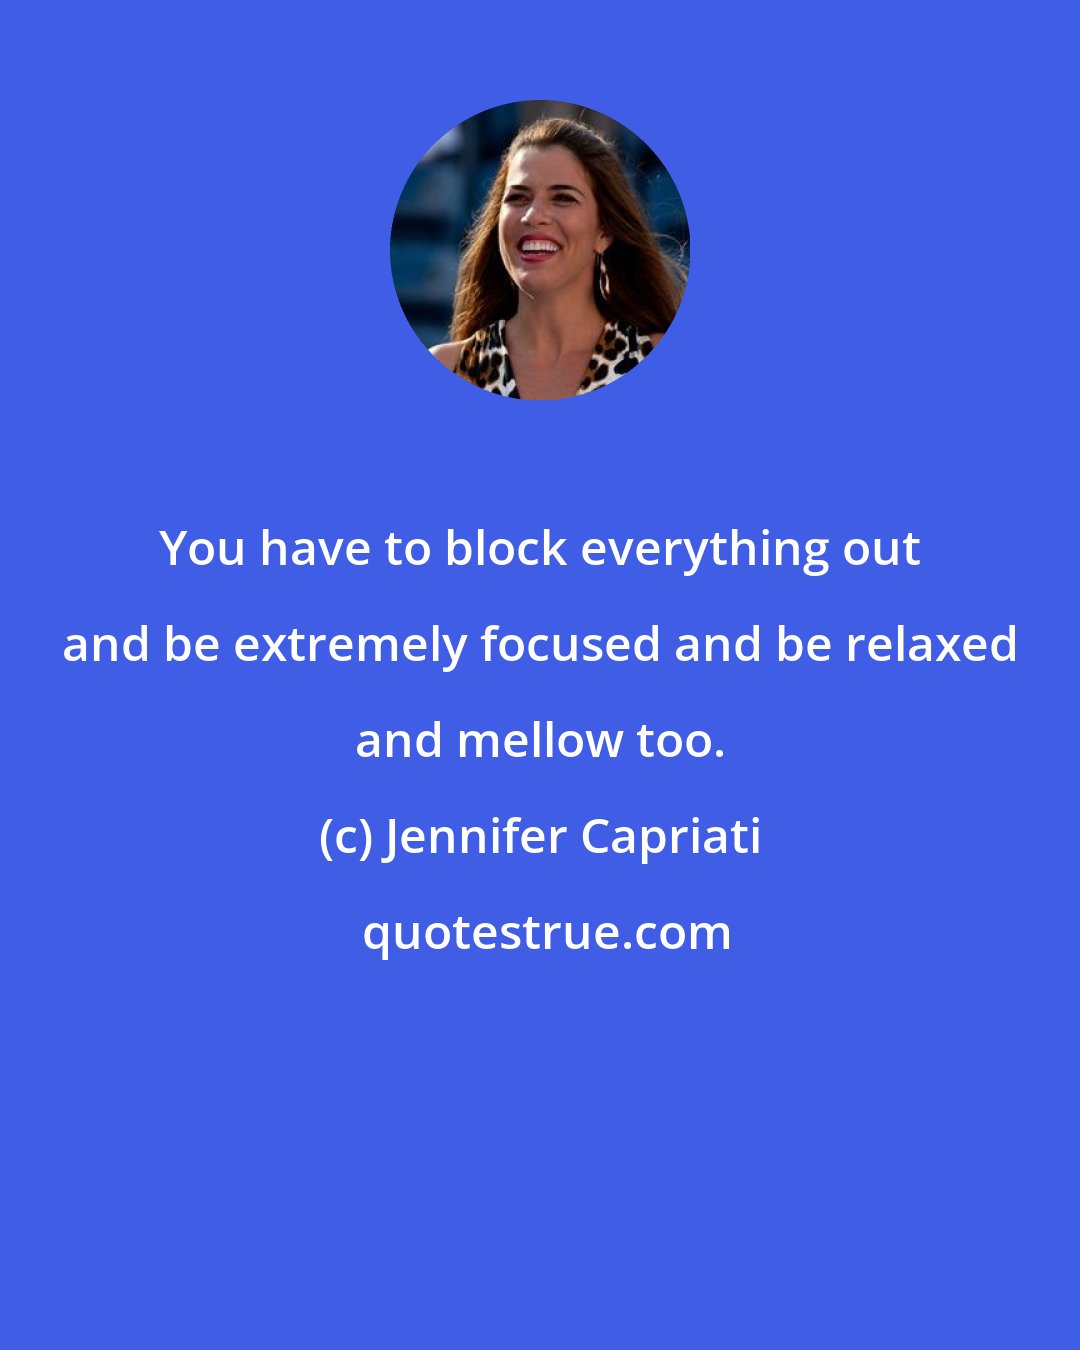 Jennifer Capriati: You have to block everything out and be extremely focused and be relaxed and mellow too.